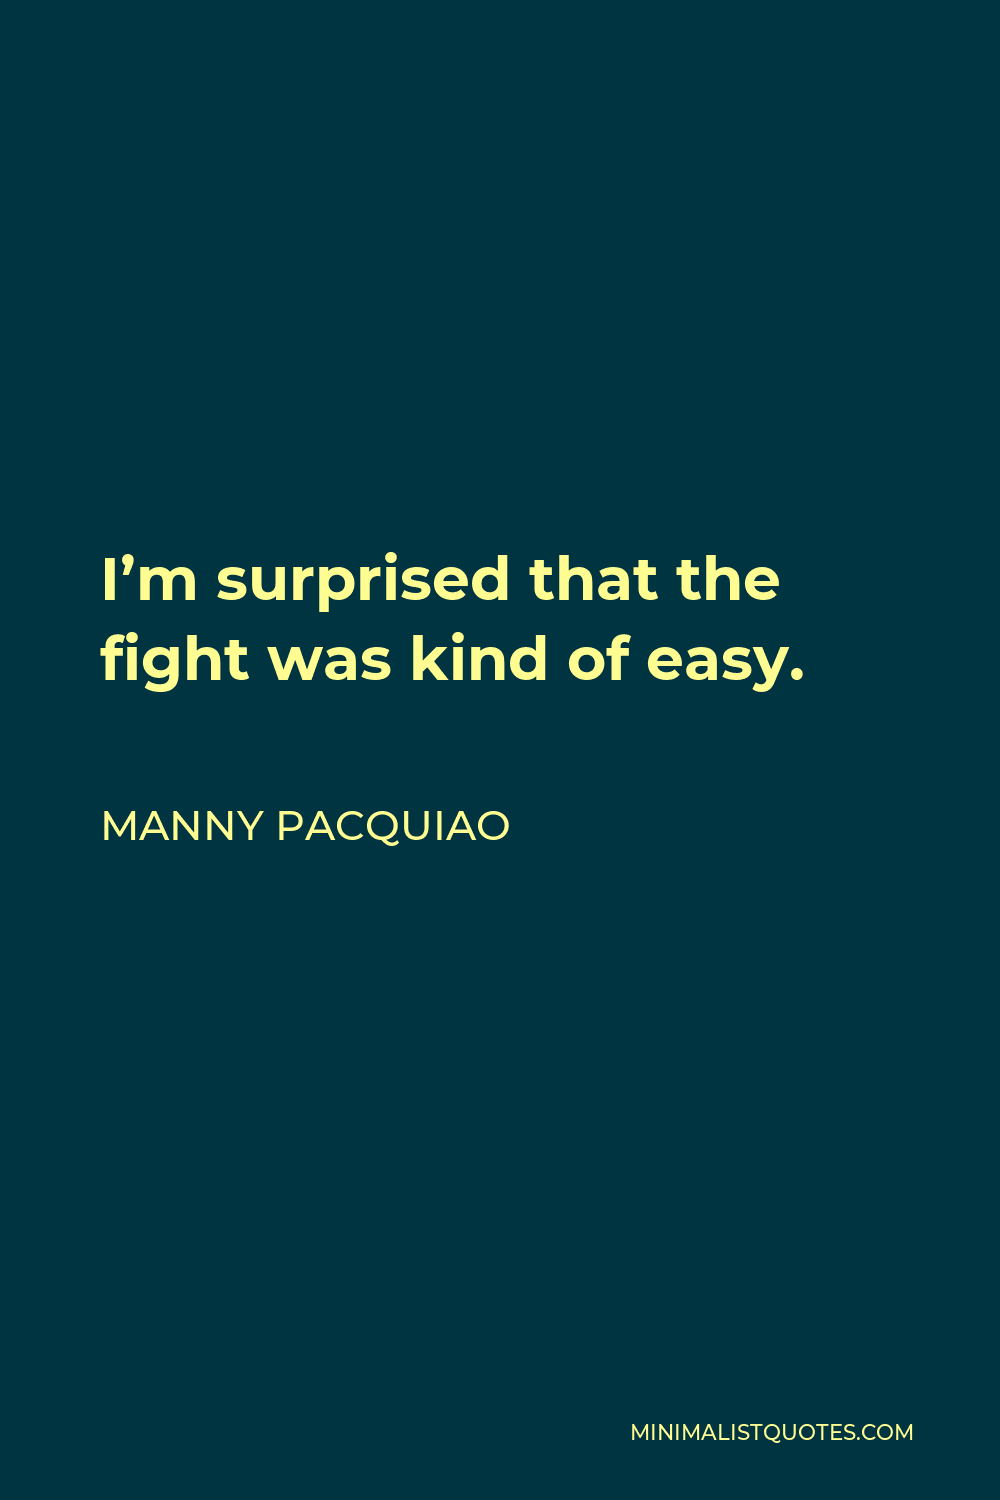 Manny Pacquiao Quote - I’m surprised that the fight was kind of easy.